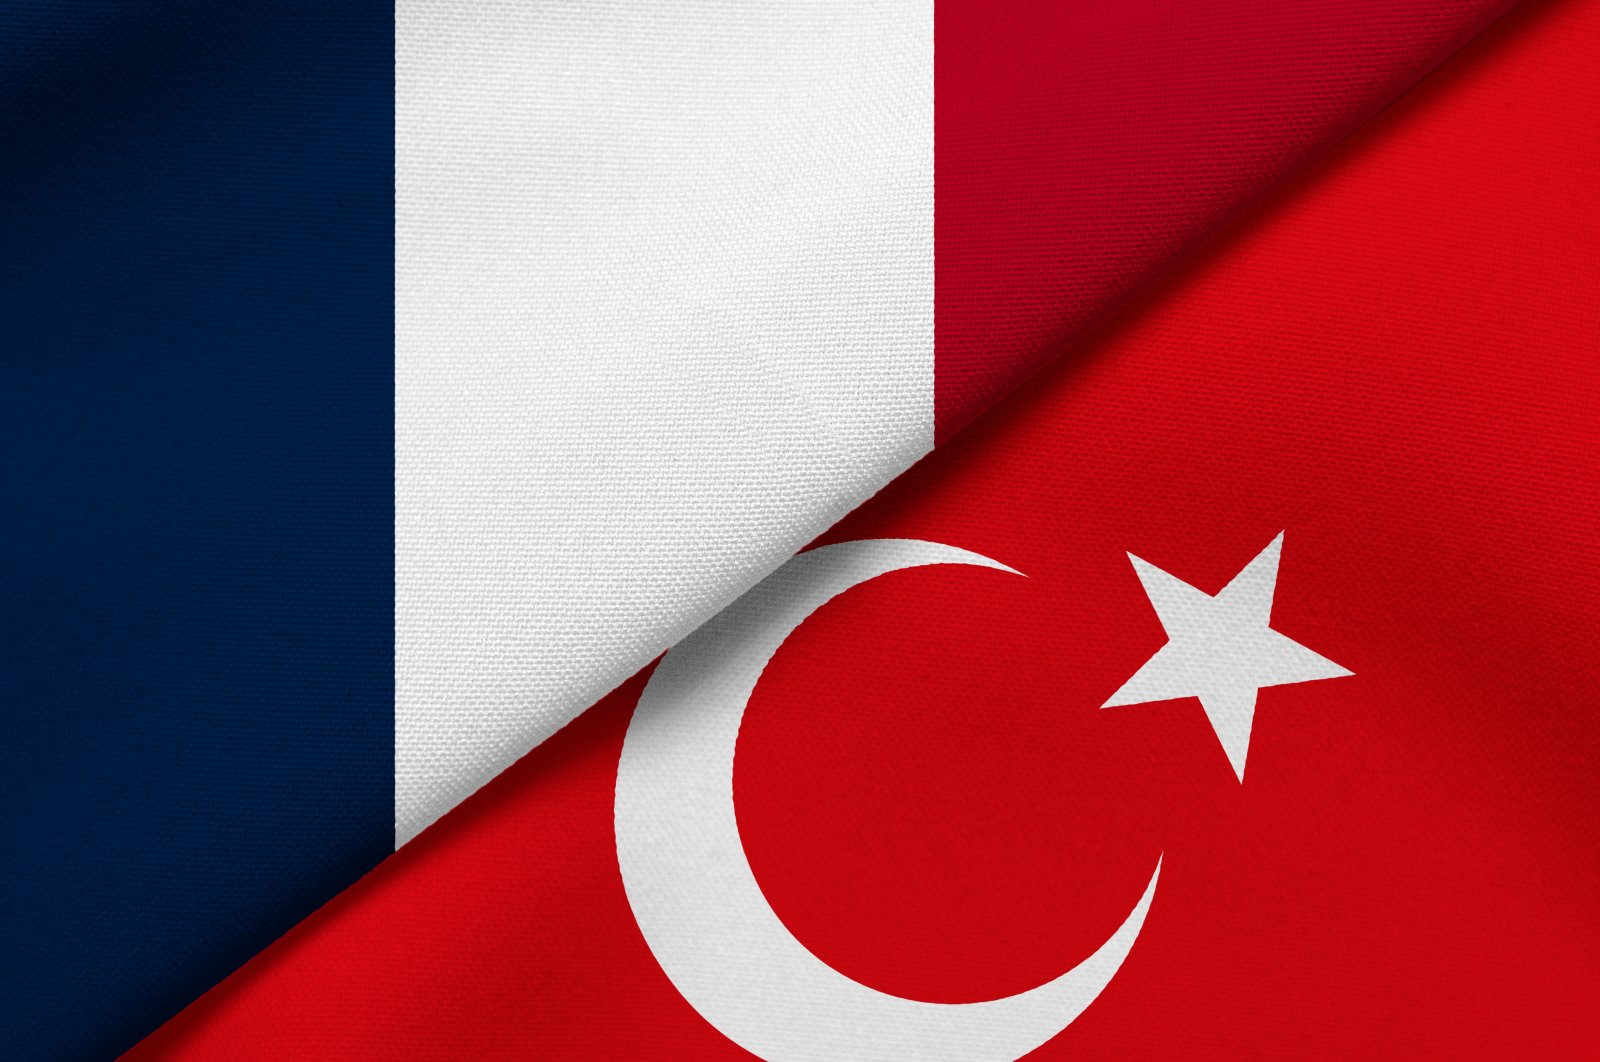 The flags of France and Türkiye can be seen in this photo. (Shutterstock)